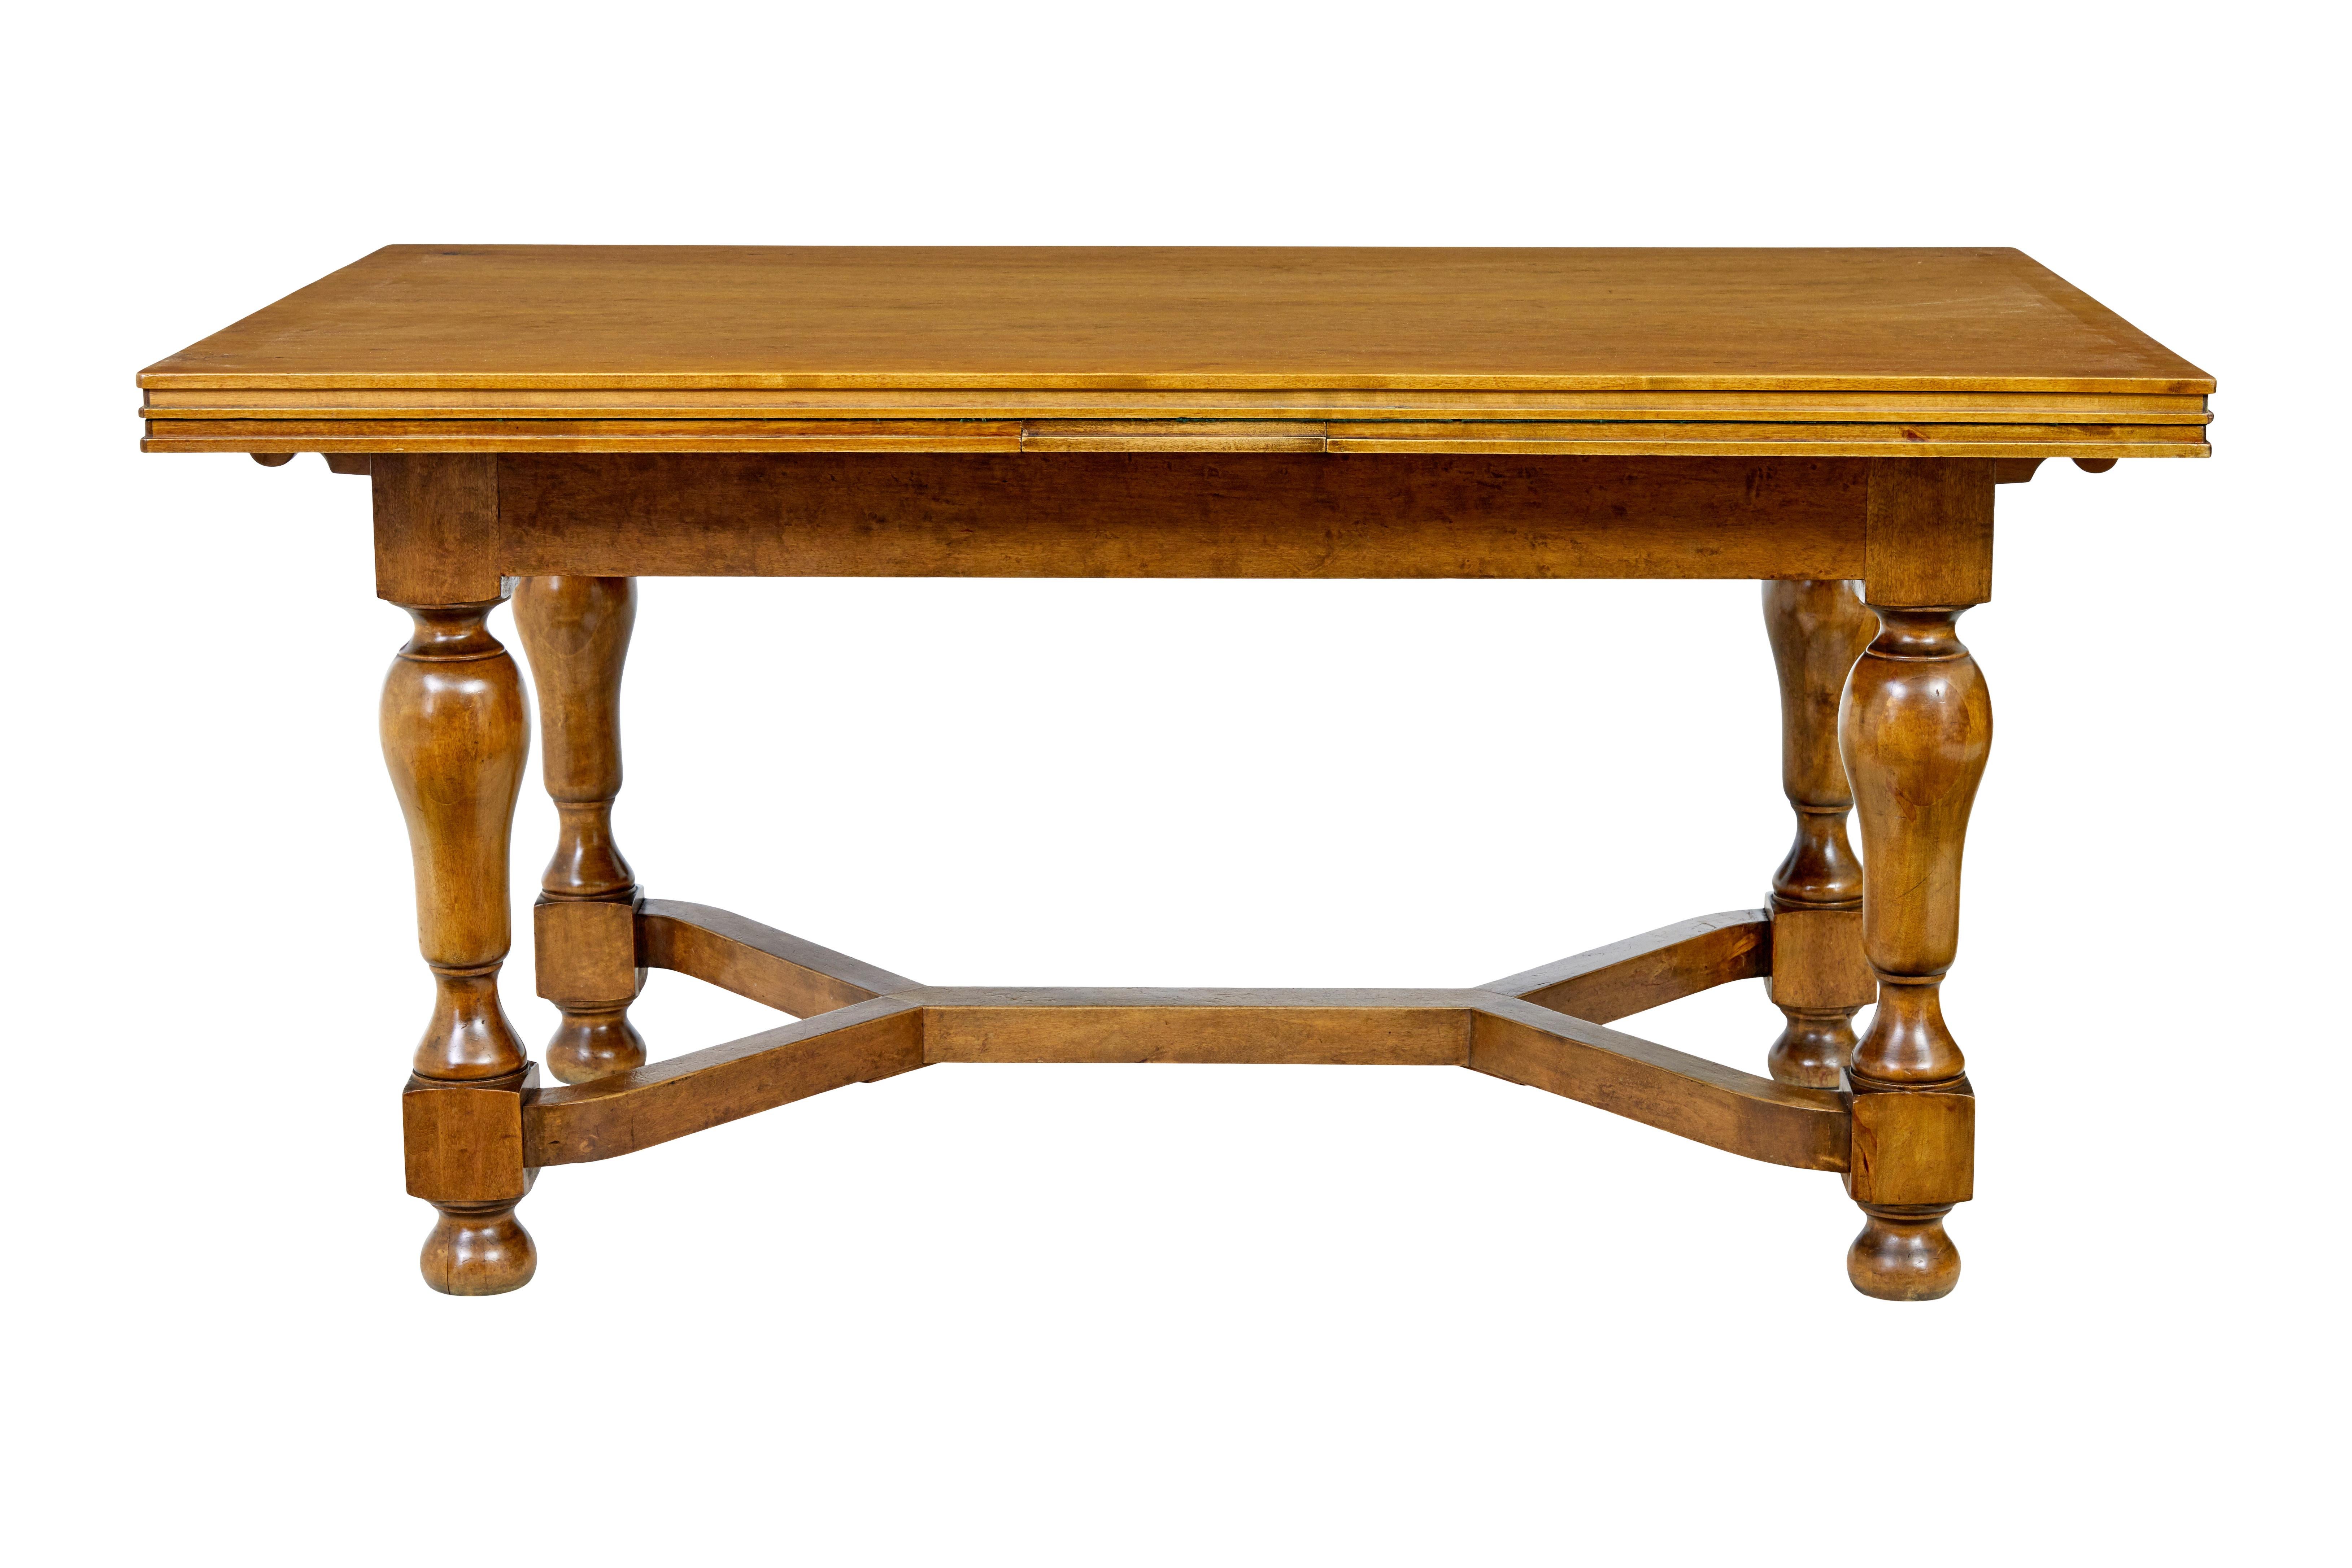 Early 20th century birch extending dining table, circa 1920.

Good quality Swedish made draw leaf dining table, styled in the classical taste with deco influences.

Rectangular birch top with good grain and rich colour, with 2 pull out pine draw